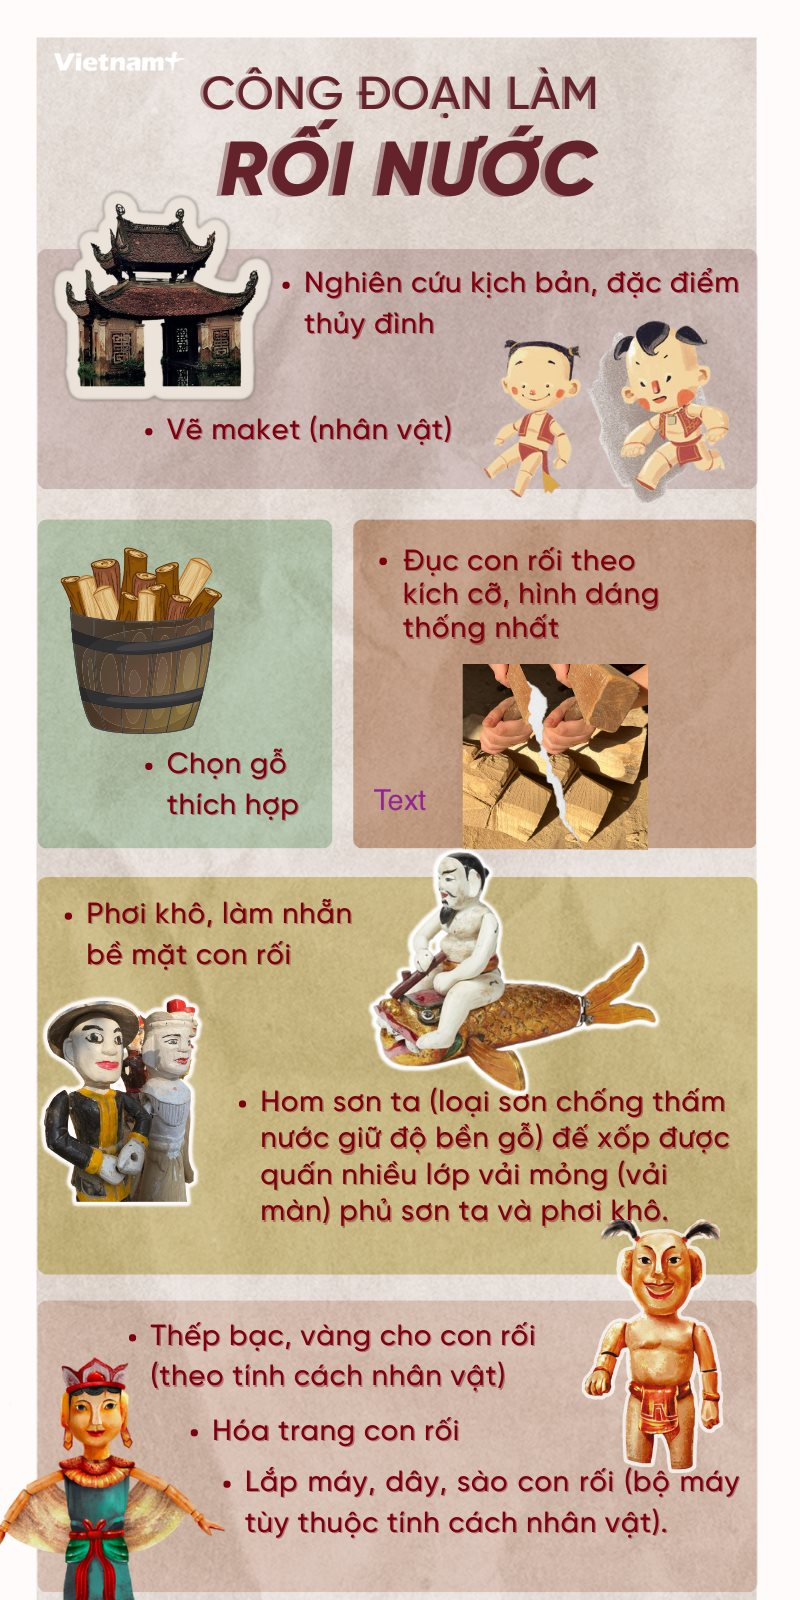 15.-infographic-cong-doan-lam-roi-nuoc.png